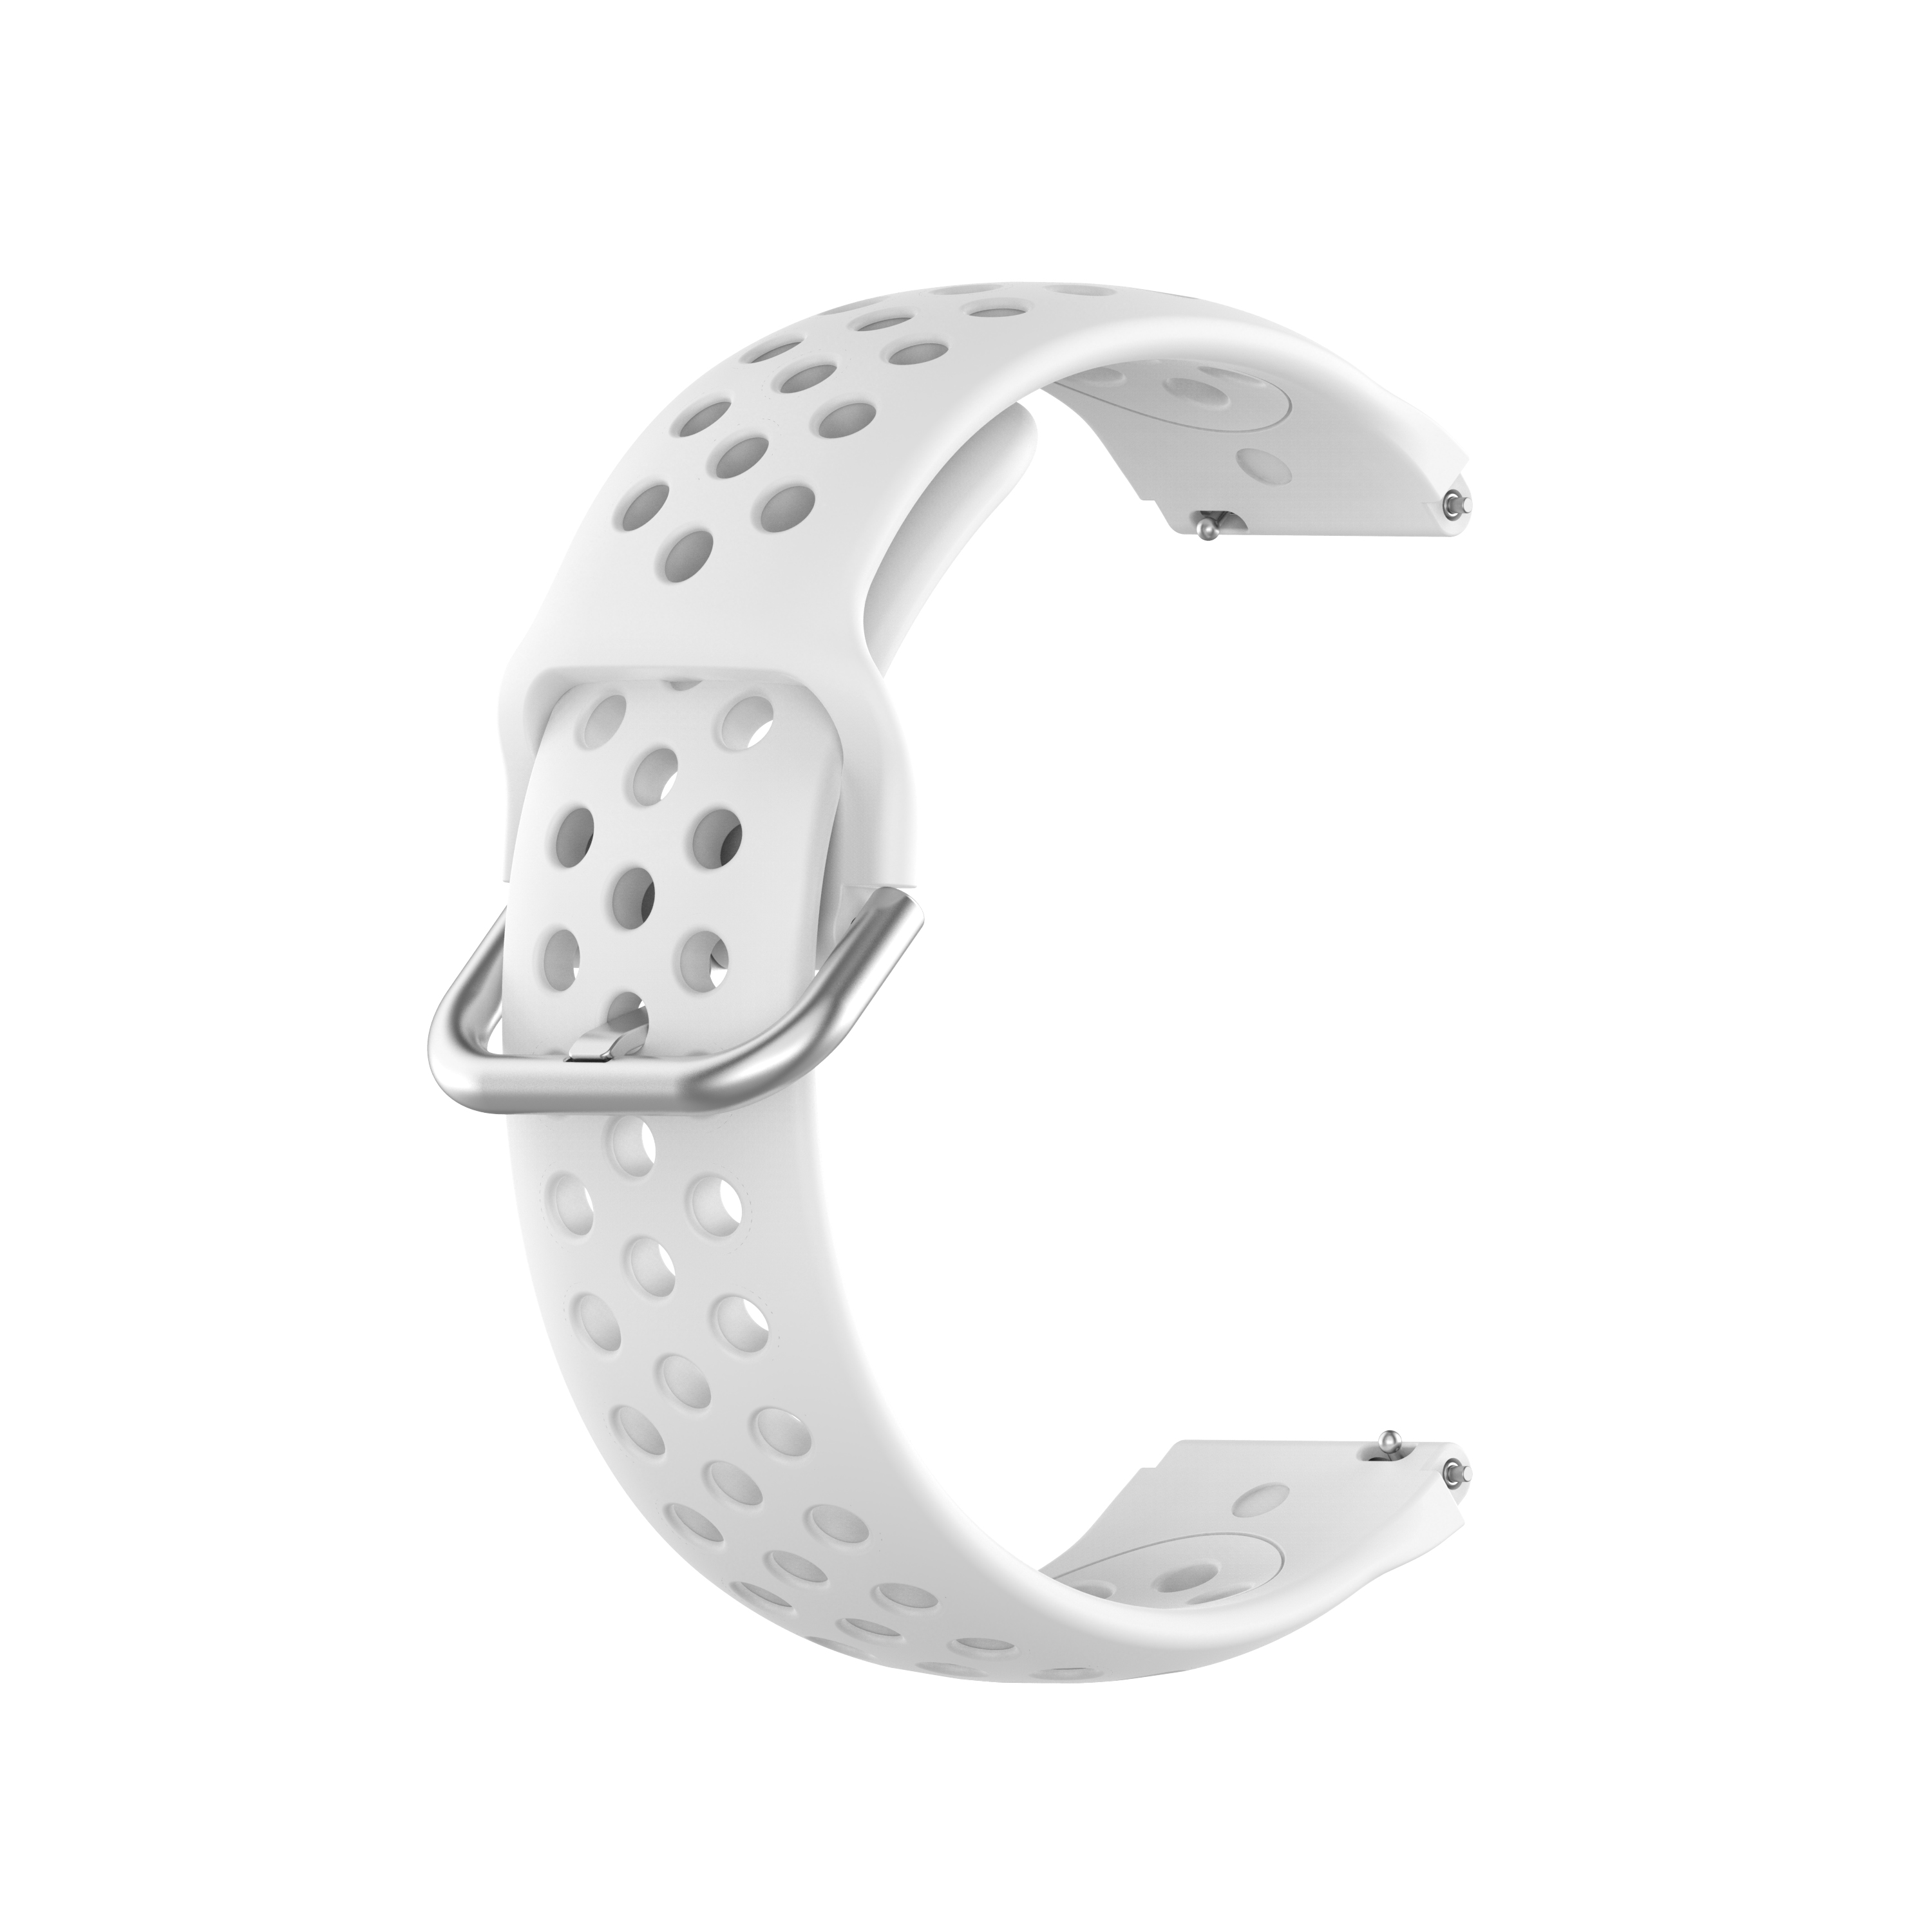 Bakeey-18mm-Stomatal-Silicone-Smart-Watch-Band-Replacement-Strap-For-Xiaomi-Smart-Watch-Non-original-1668524-18